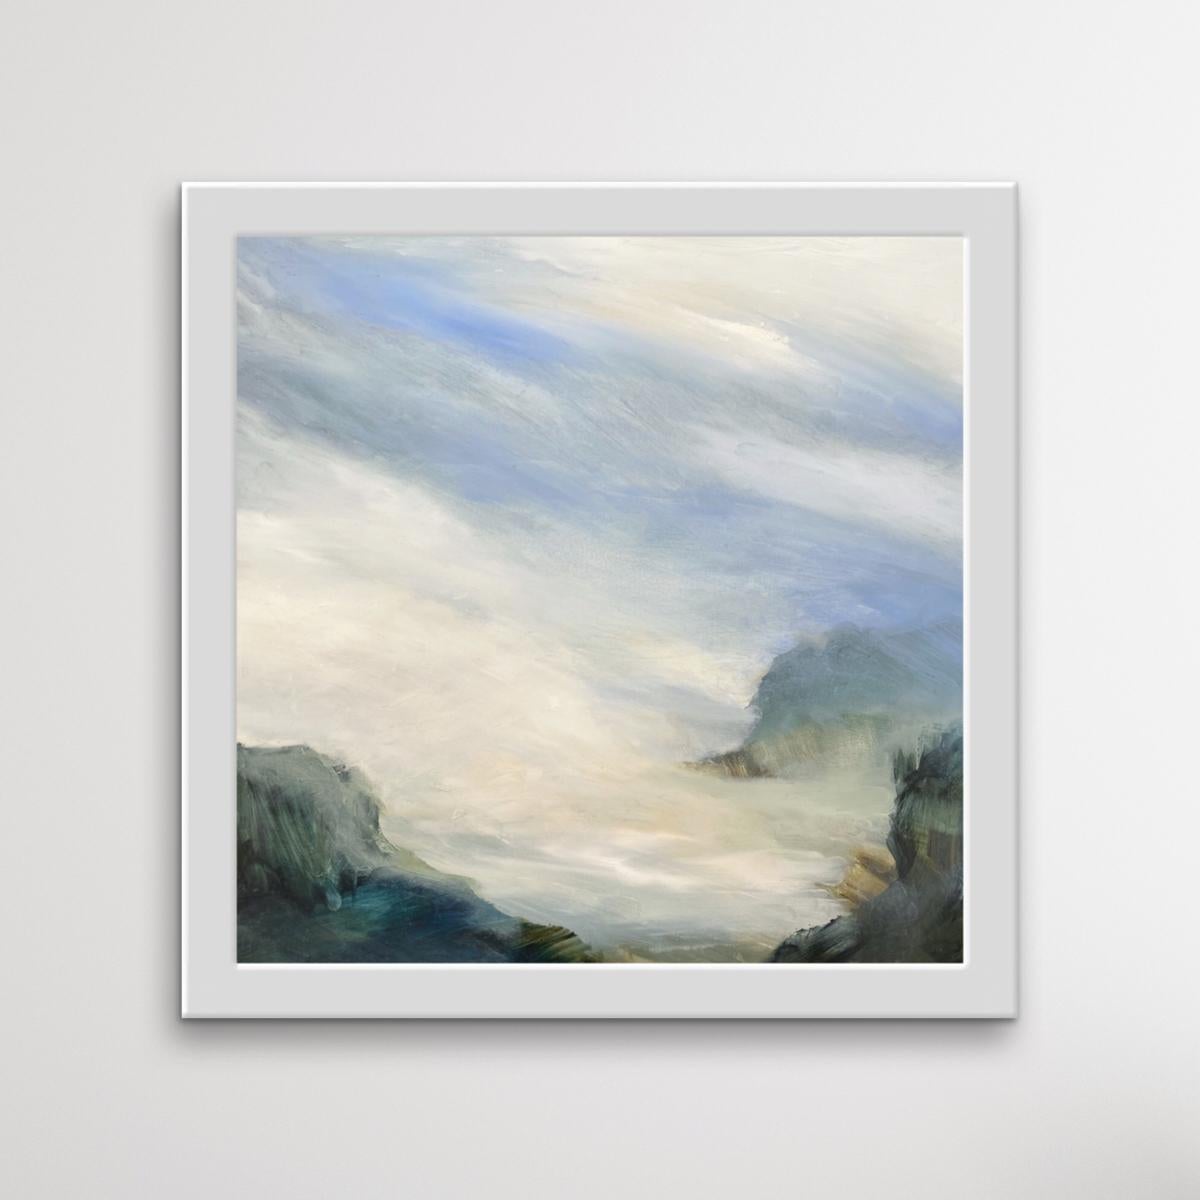 Coastal Mist [2022]
original and hand signed by the artist 
Oil Paint on Cradled Panel
Image size: H:25 cm x W:25 cm
Complete Size of Unframed Work: H:25 cm x W:25 cm x D:2cm
Sold Unframed
Please note that insitu images are purely an indication of